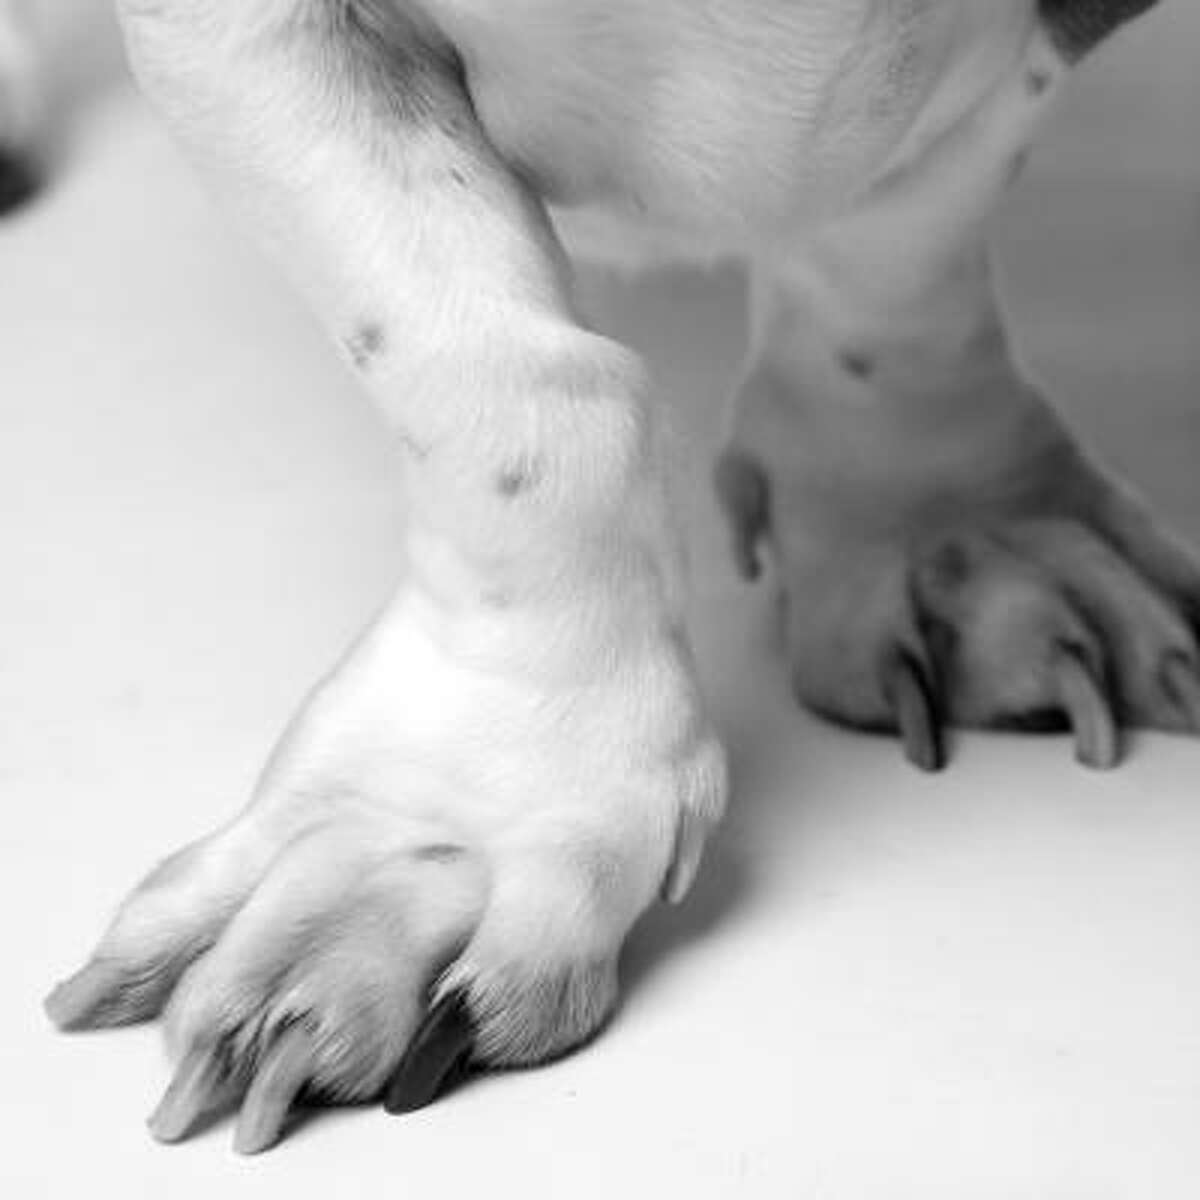 Rudy, like all Bassets, has distinctive feet. Sometimes, Jones finds, the parts are even greater than the whole.